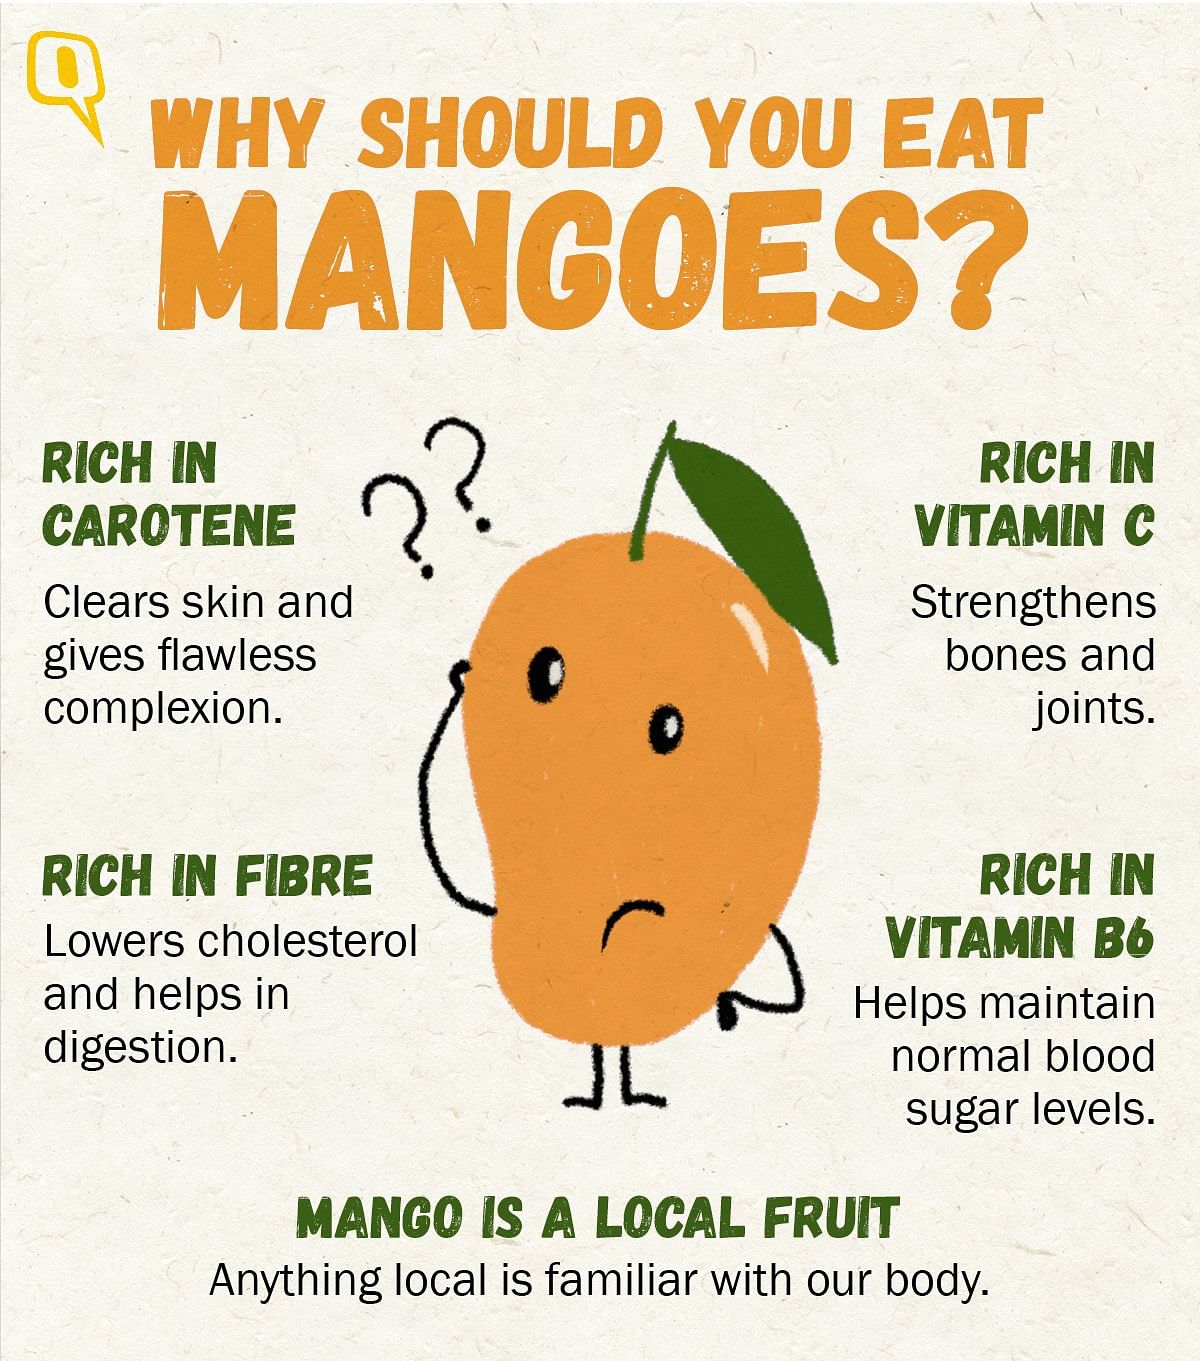 Are mangoes fattening and full of calories? Find out.